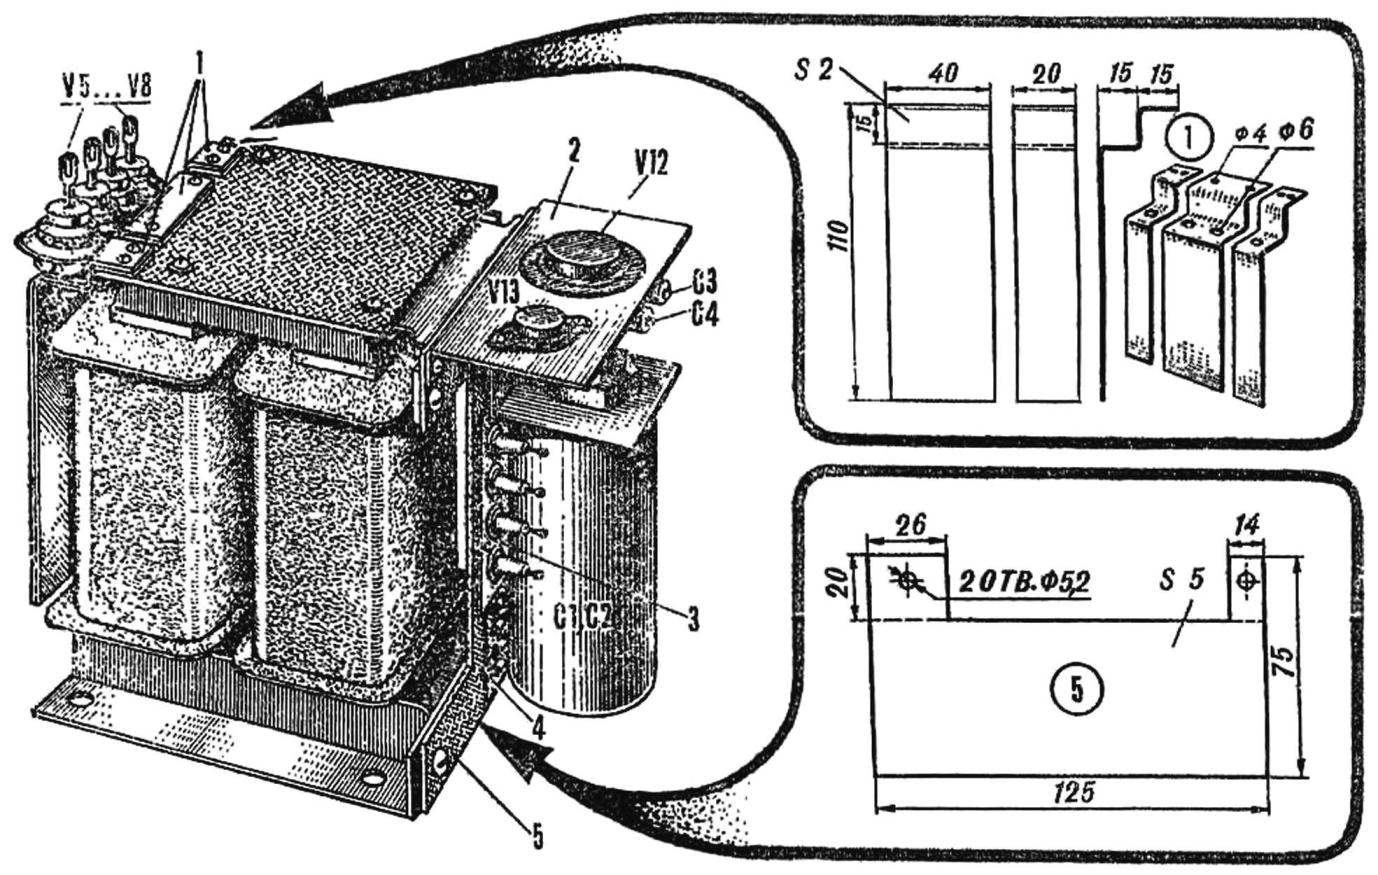 Fig. 2. Power transformer with installed elements